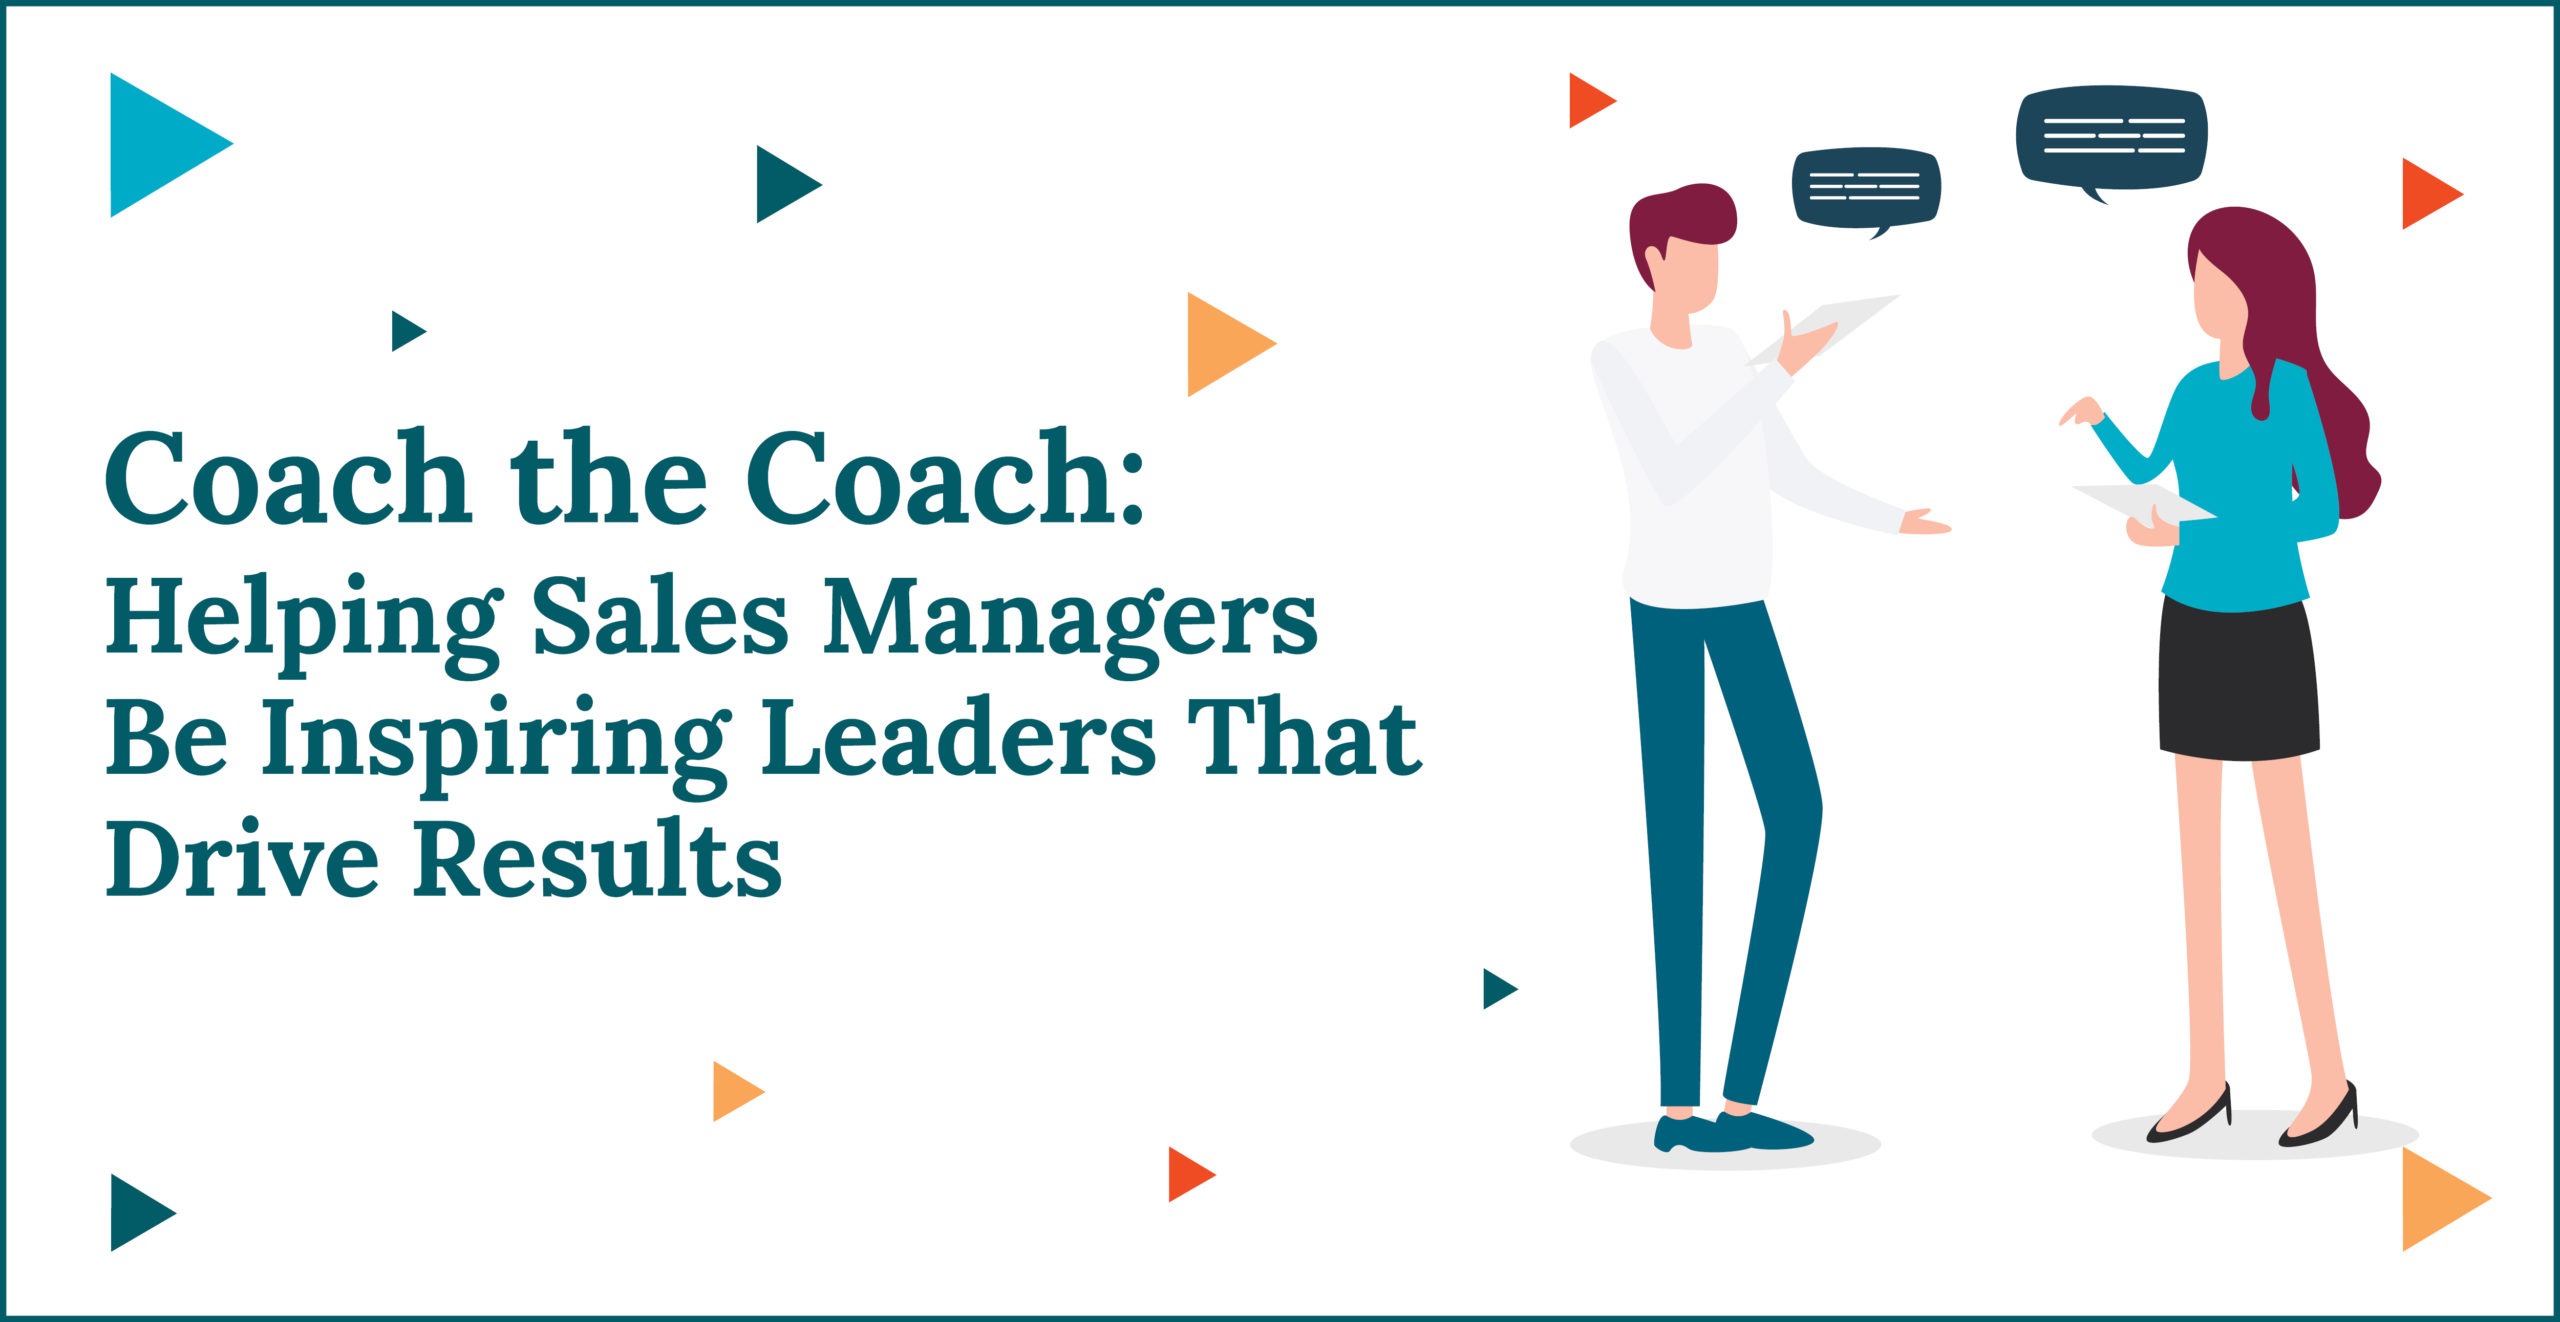 Coach the Coach: Helping Sales Managers Be Inspiring Leaders That Drive Results